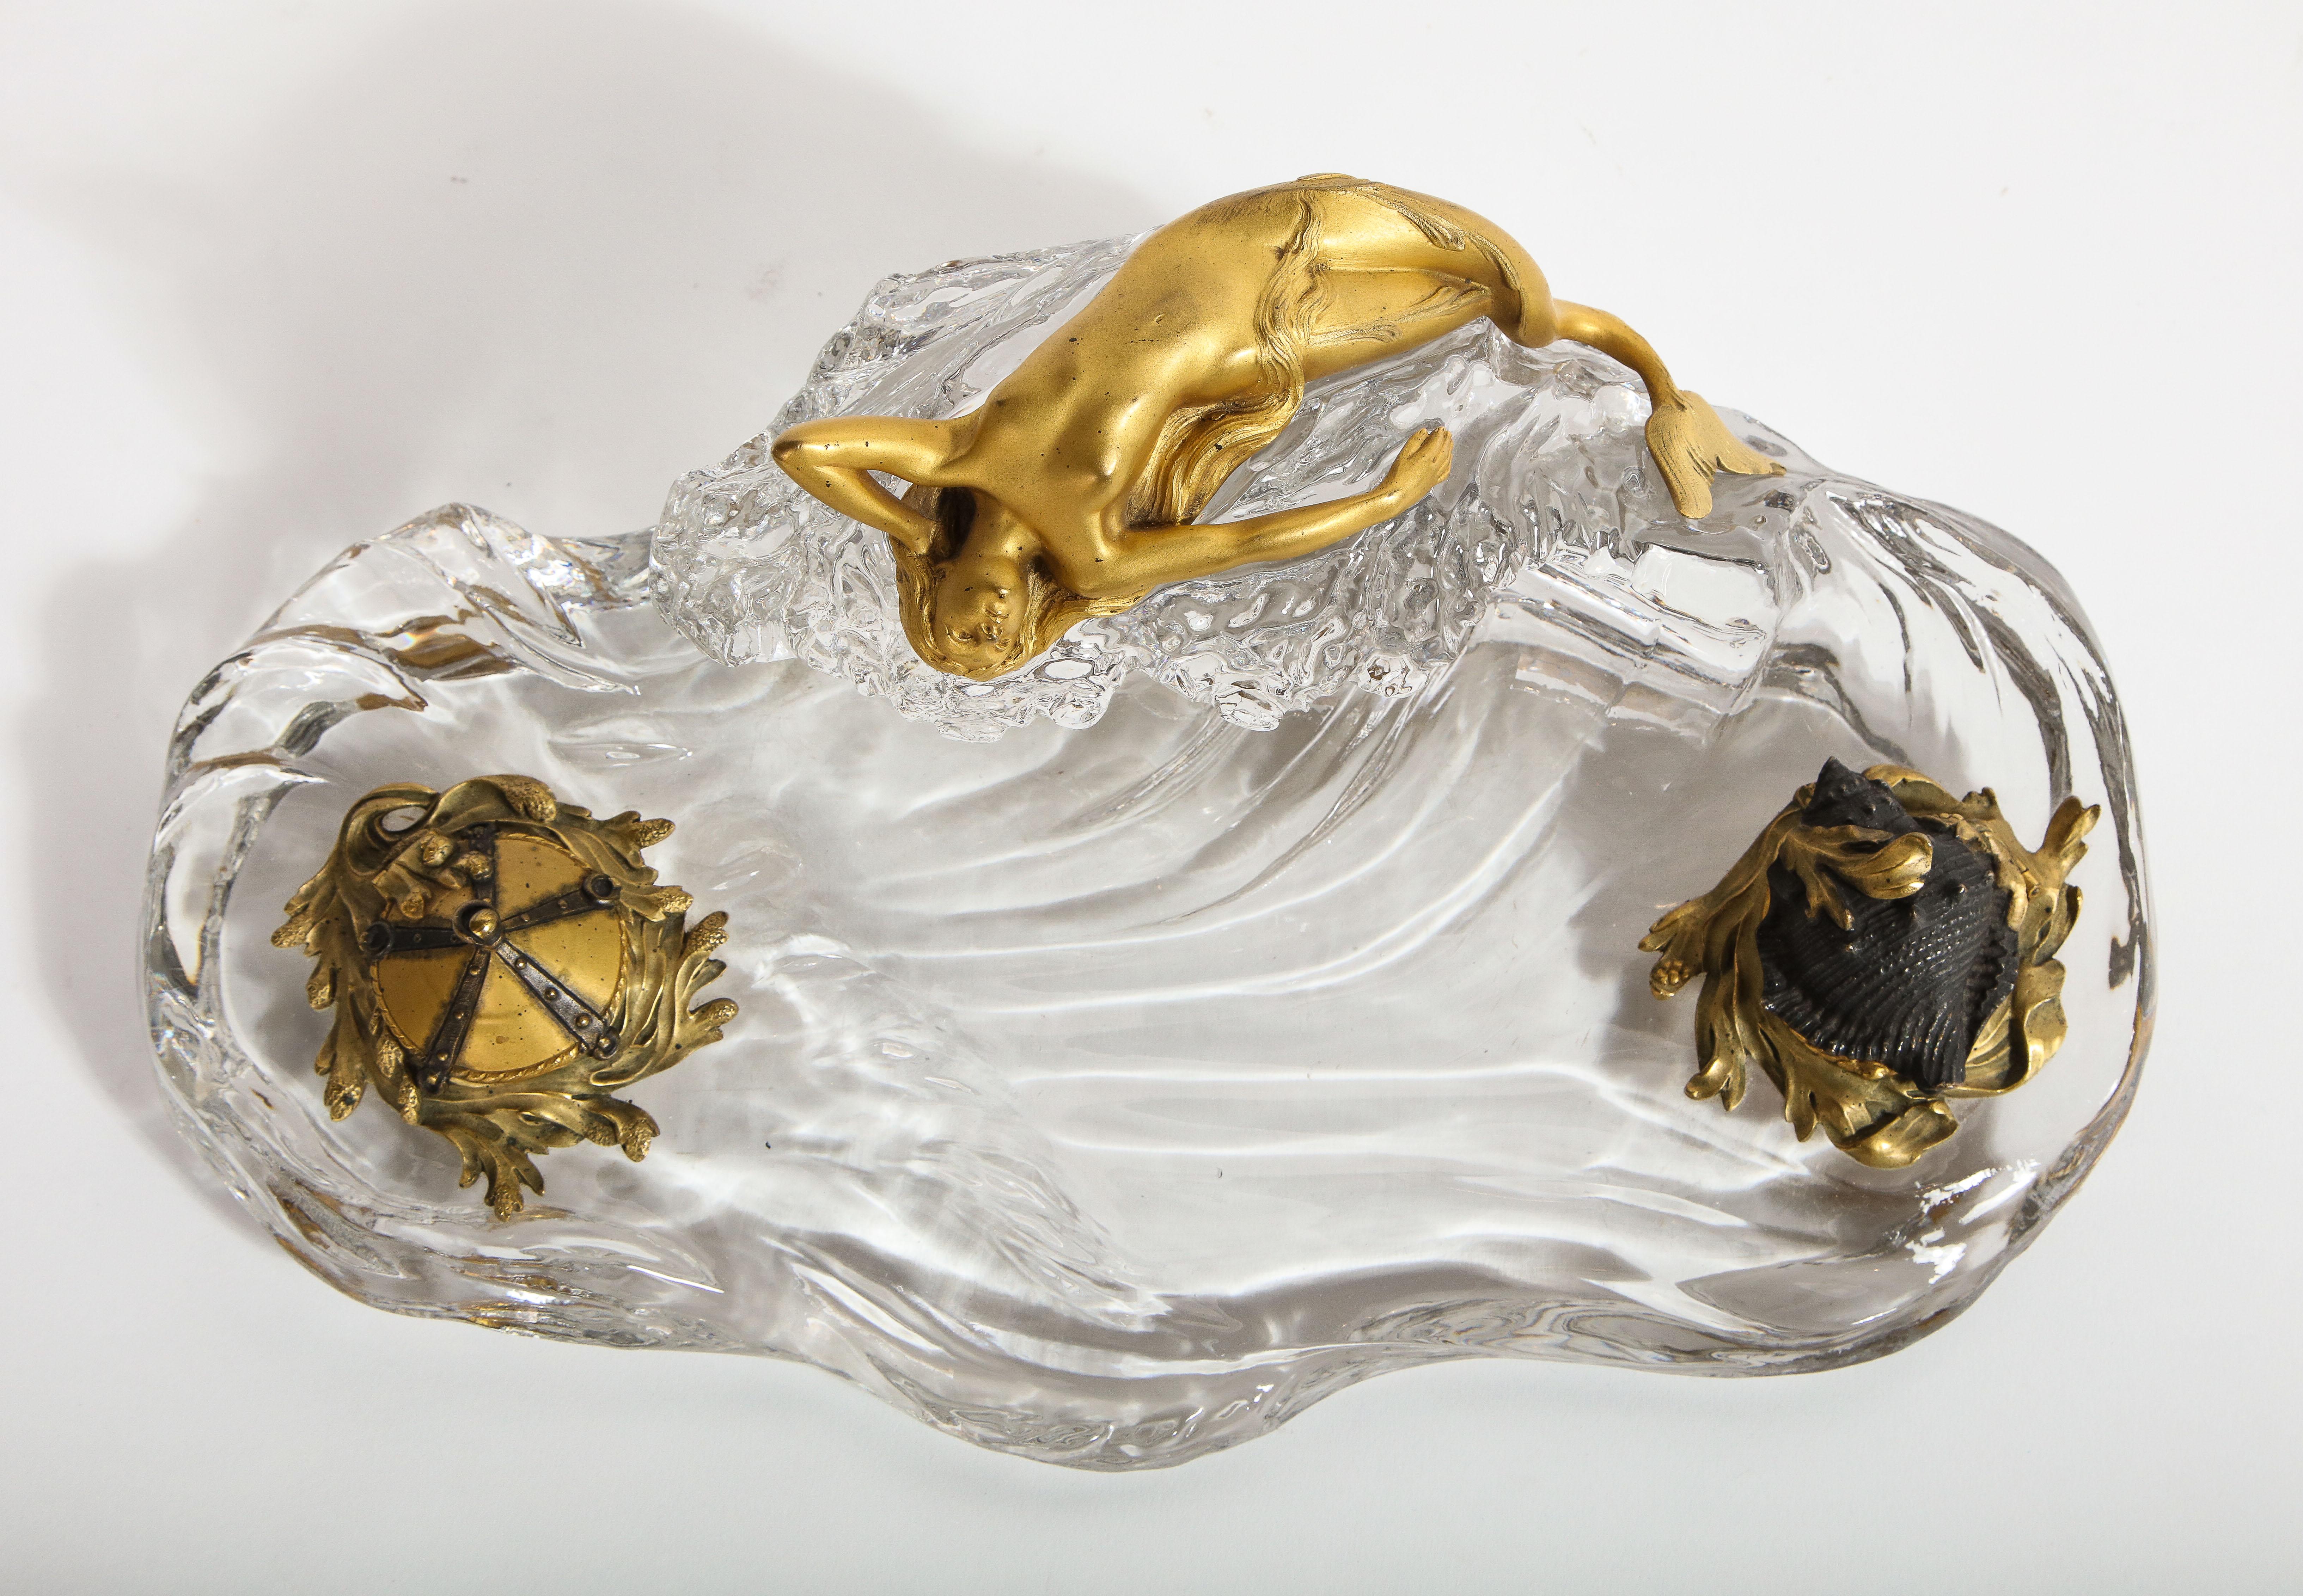 A Rare and Marvelous Signed Baccarat Crystal Nautical Inkwell with a Dore Bronze Maiden and Patinated and Dore Bronze Ink Pots. The body is made up of the finest quality of French hand-carved crystal a doré bronze mermaid sleeping on top of a